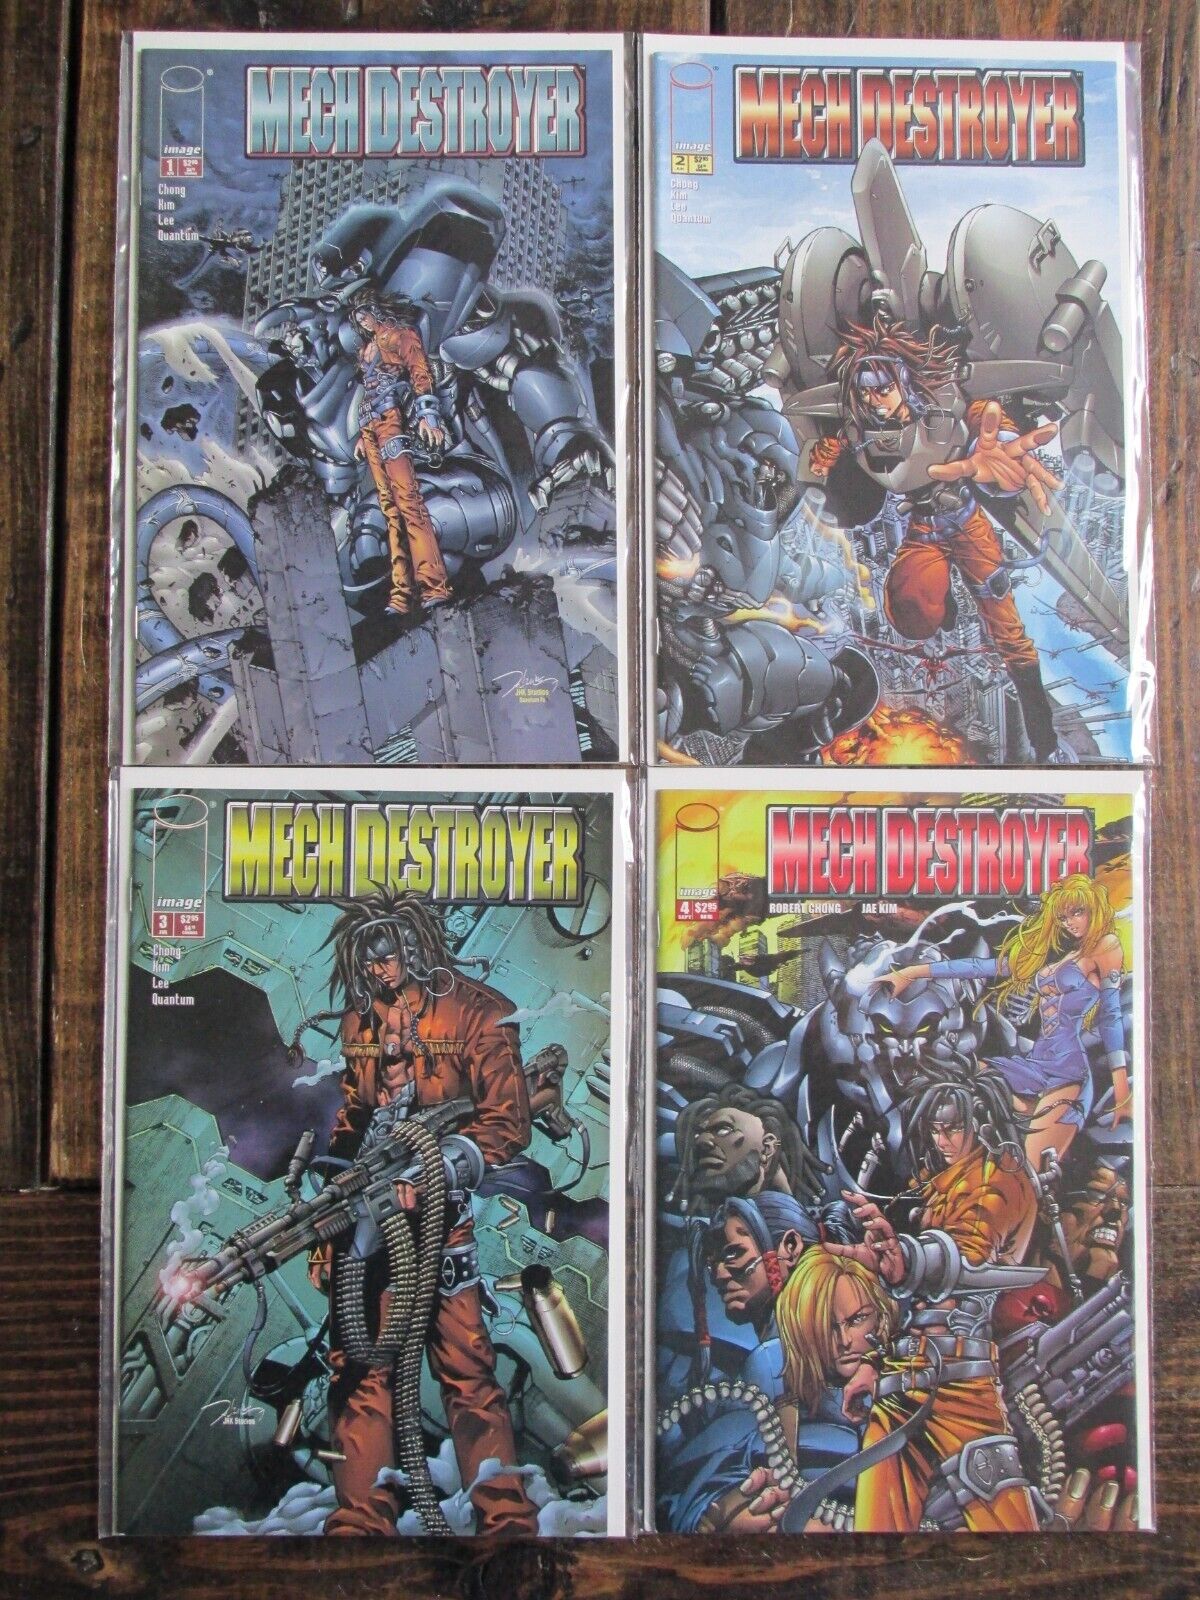 Image 2001 MECH DESTROYER Comic Book Issues # 1-4 Complete Series 1 2 3 4 Set